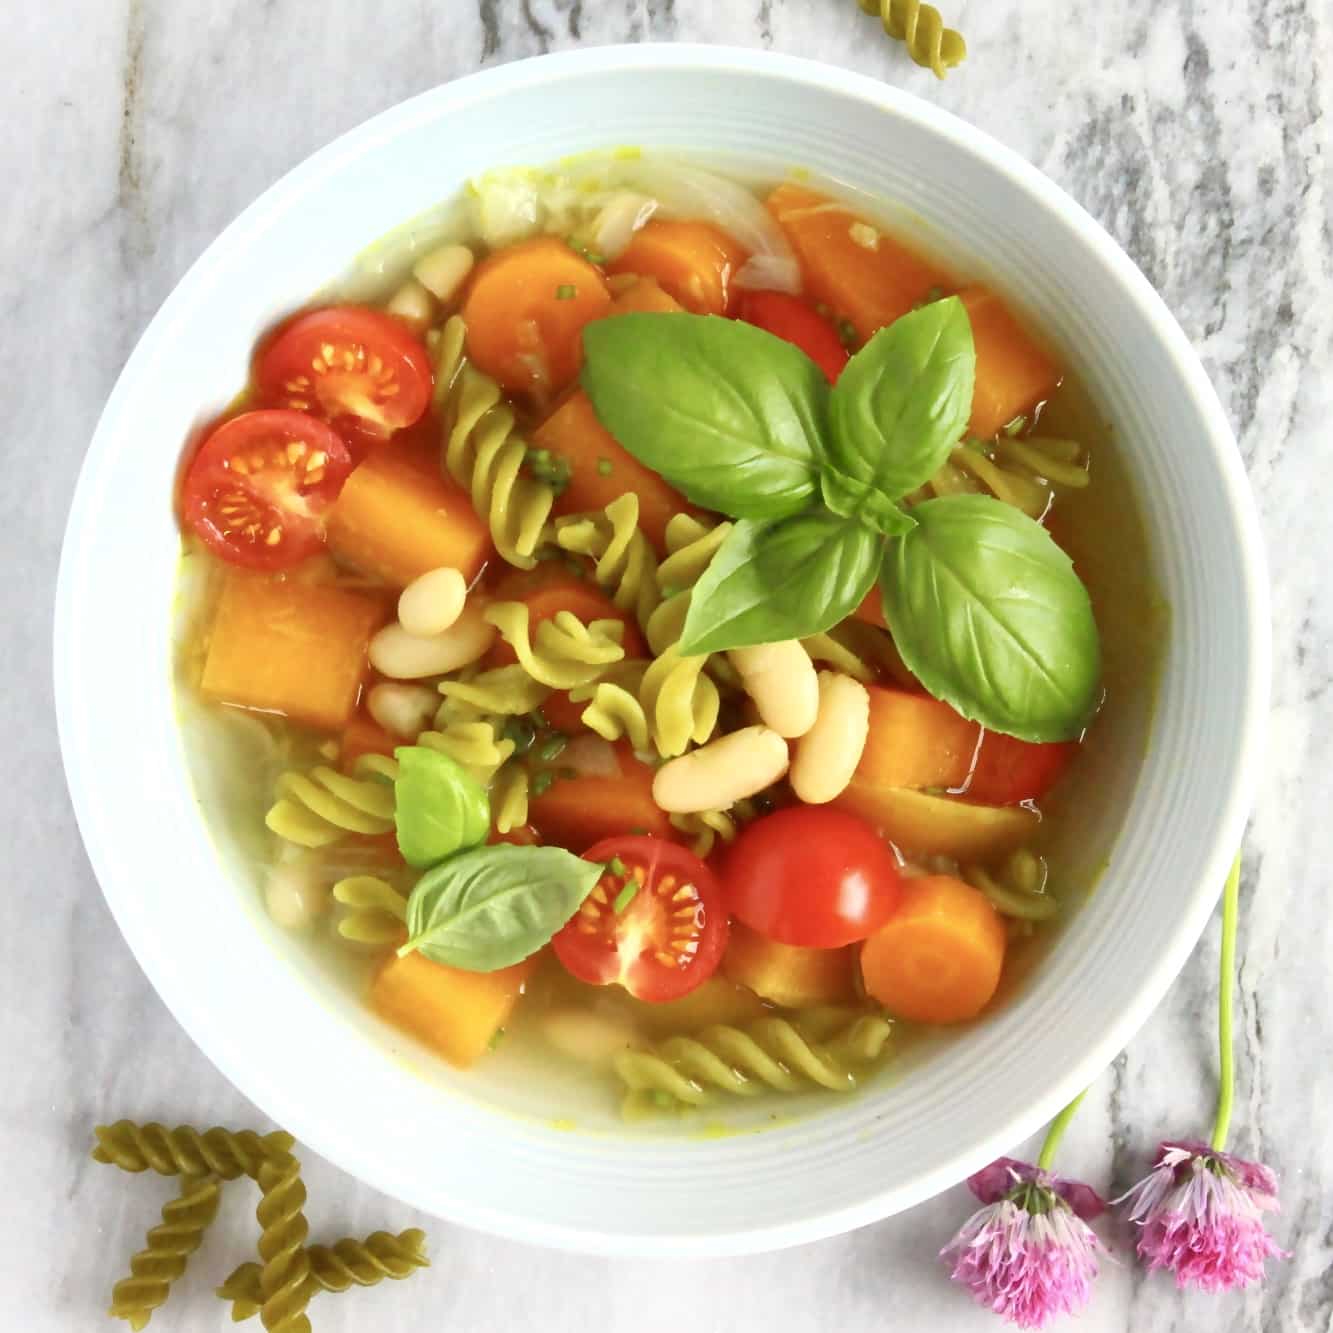 18 Vegetarian One-Pot Pasta Recipes for Busy Weeknights: Vegan Pea Pasta Minestrone Soup